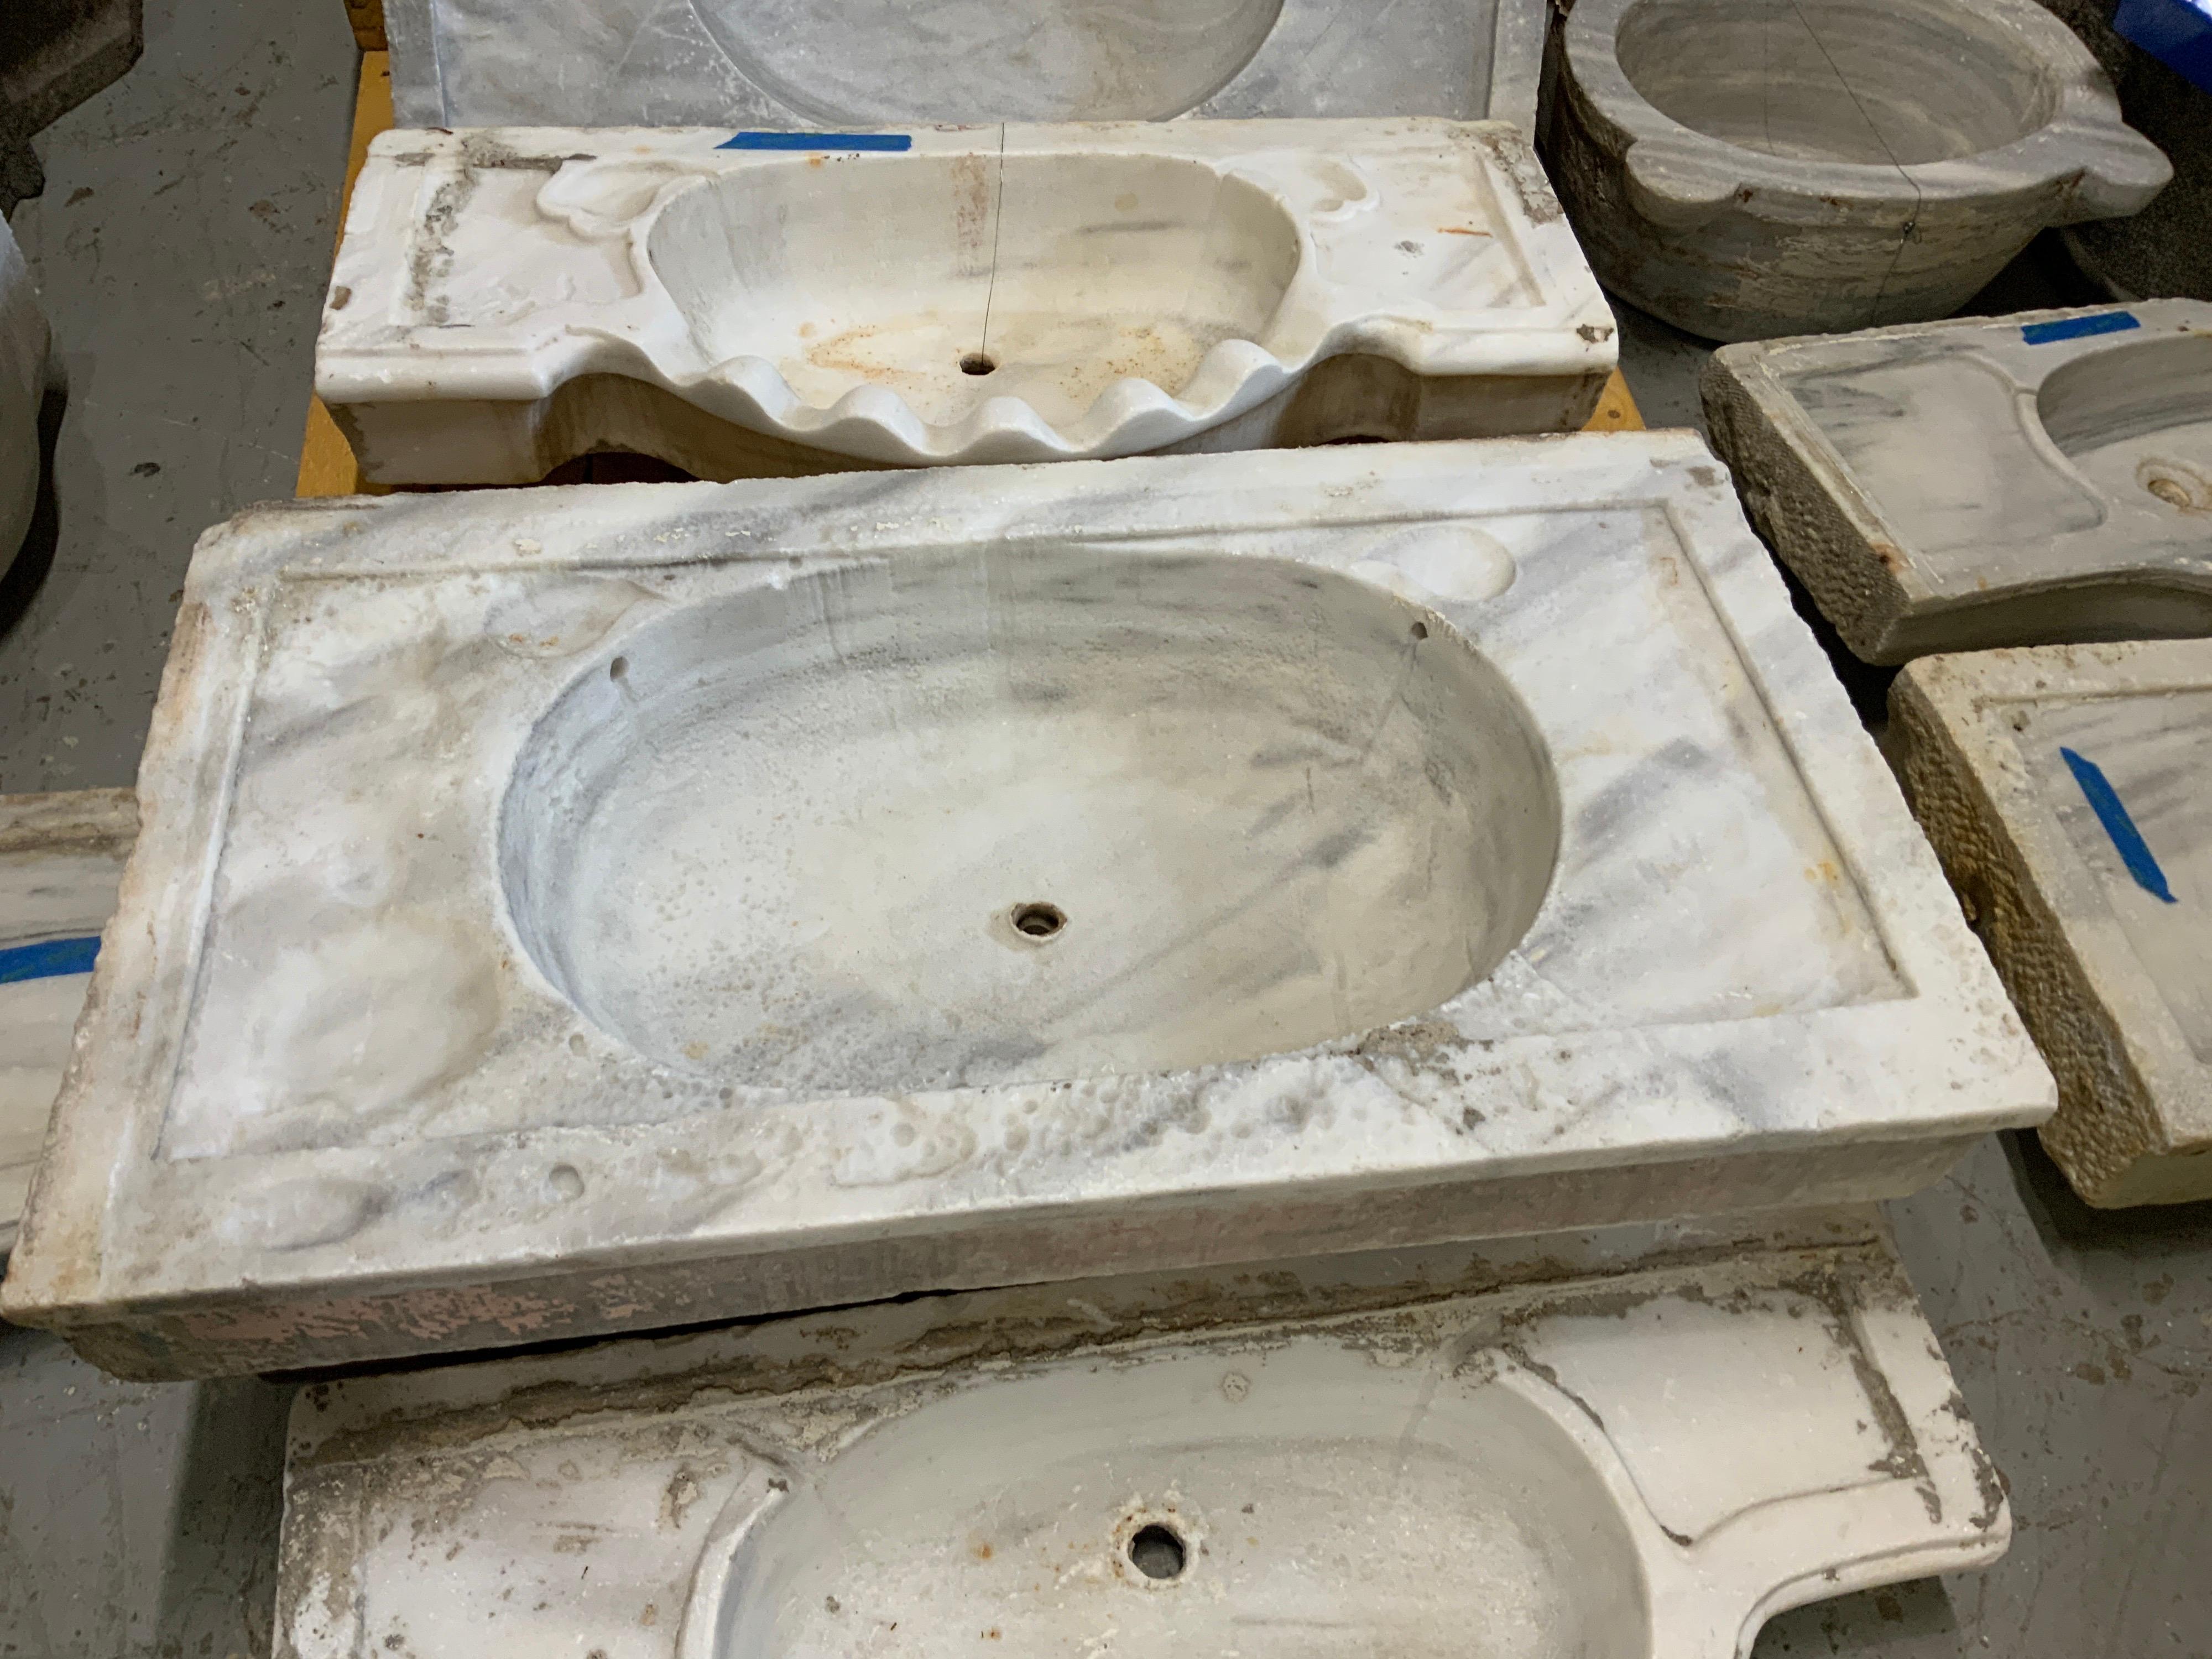 This gorgeous sink dates back to the 1850s. Item features gray accents. Origin; Greece.